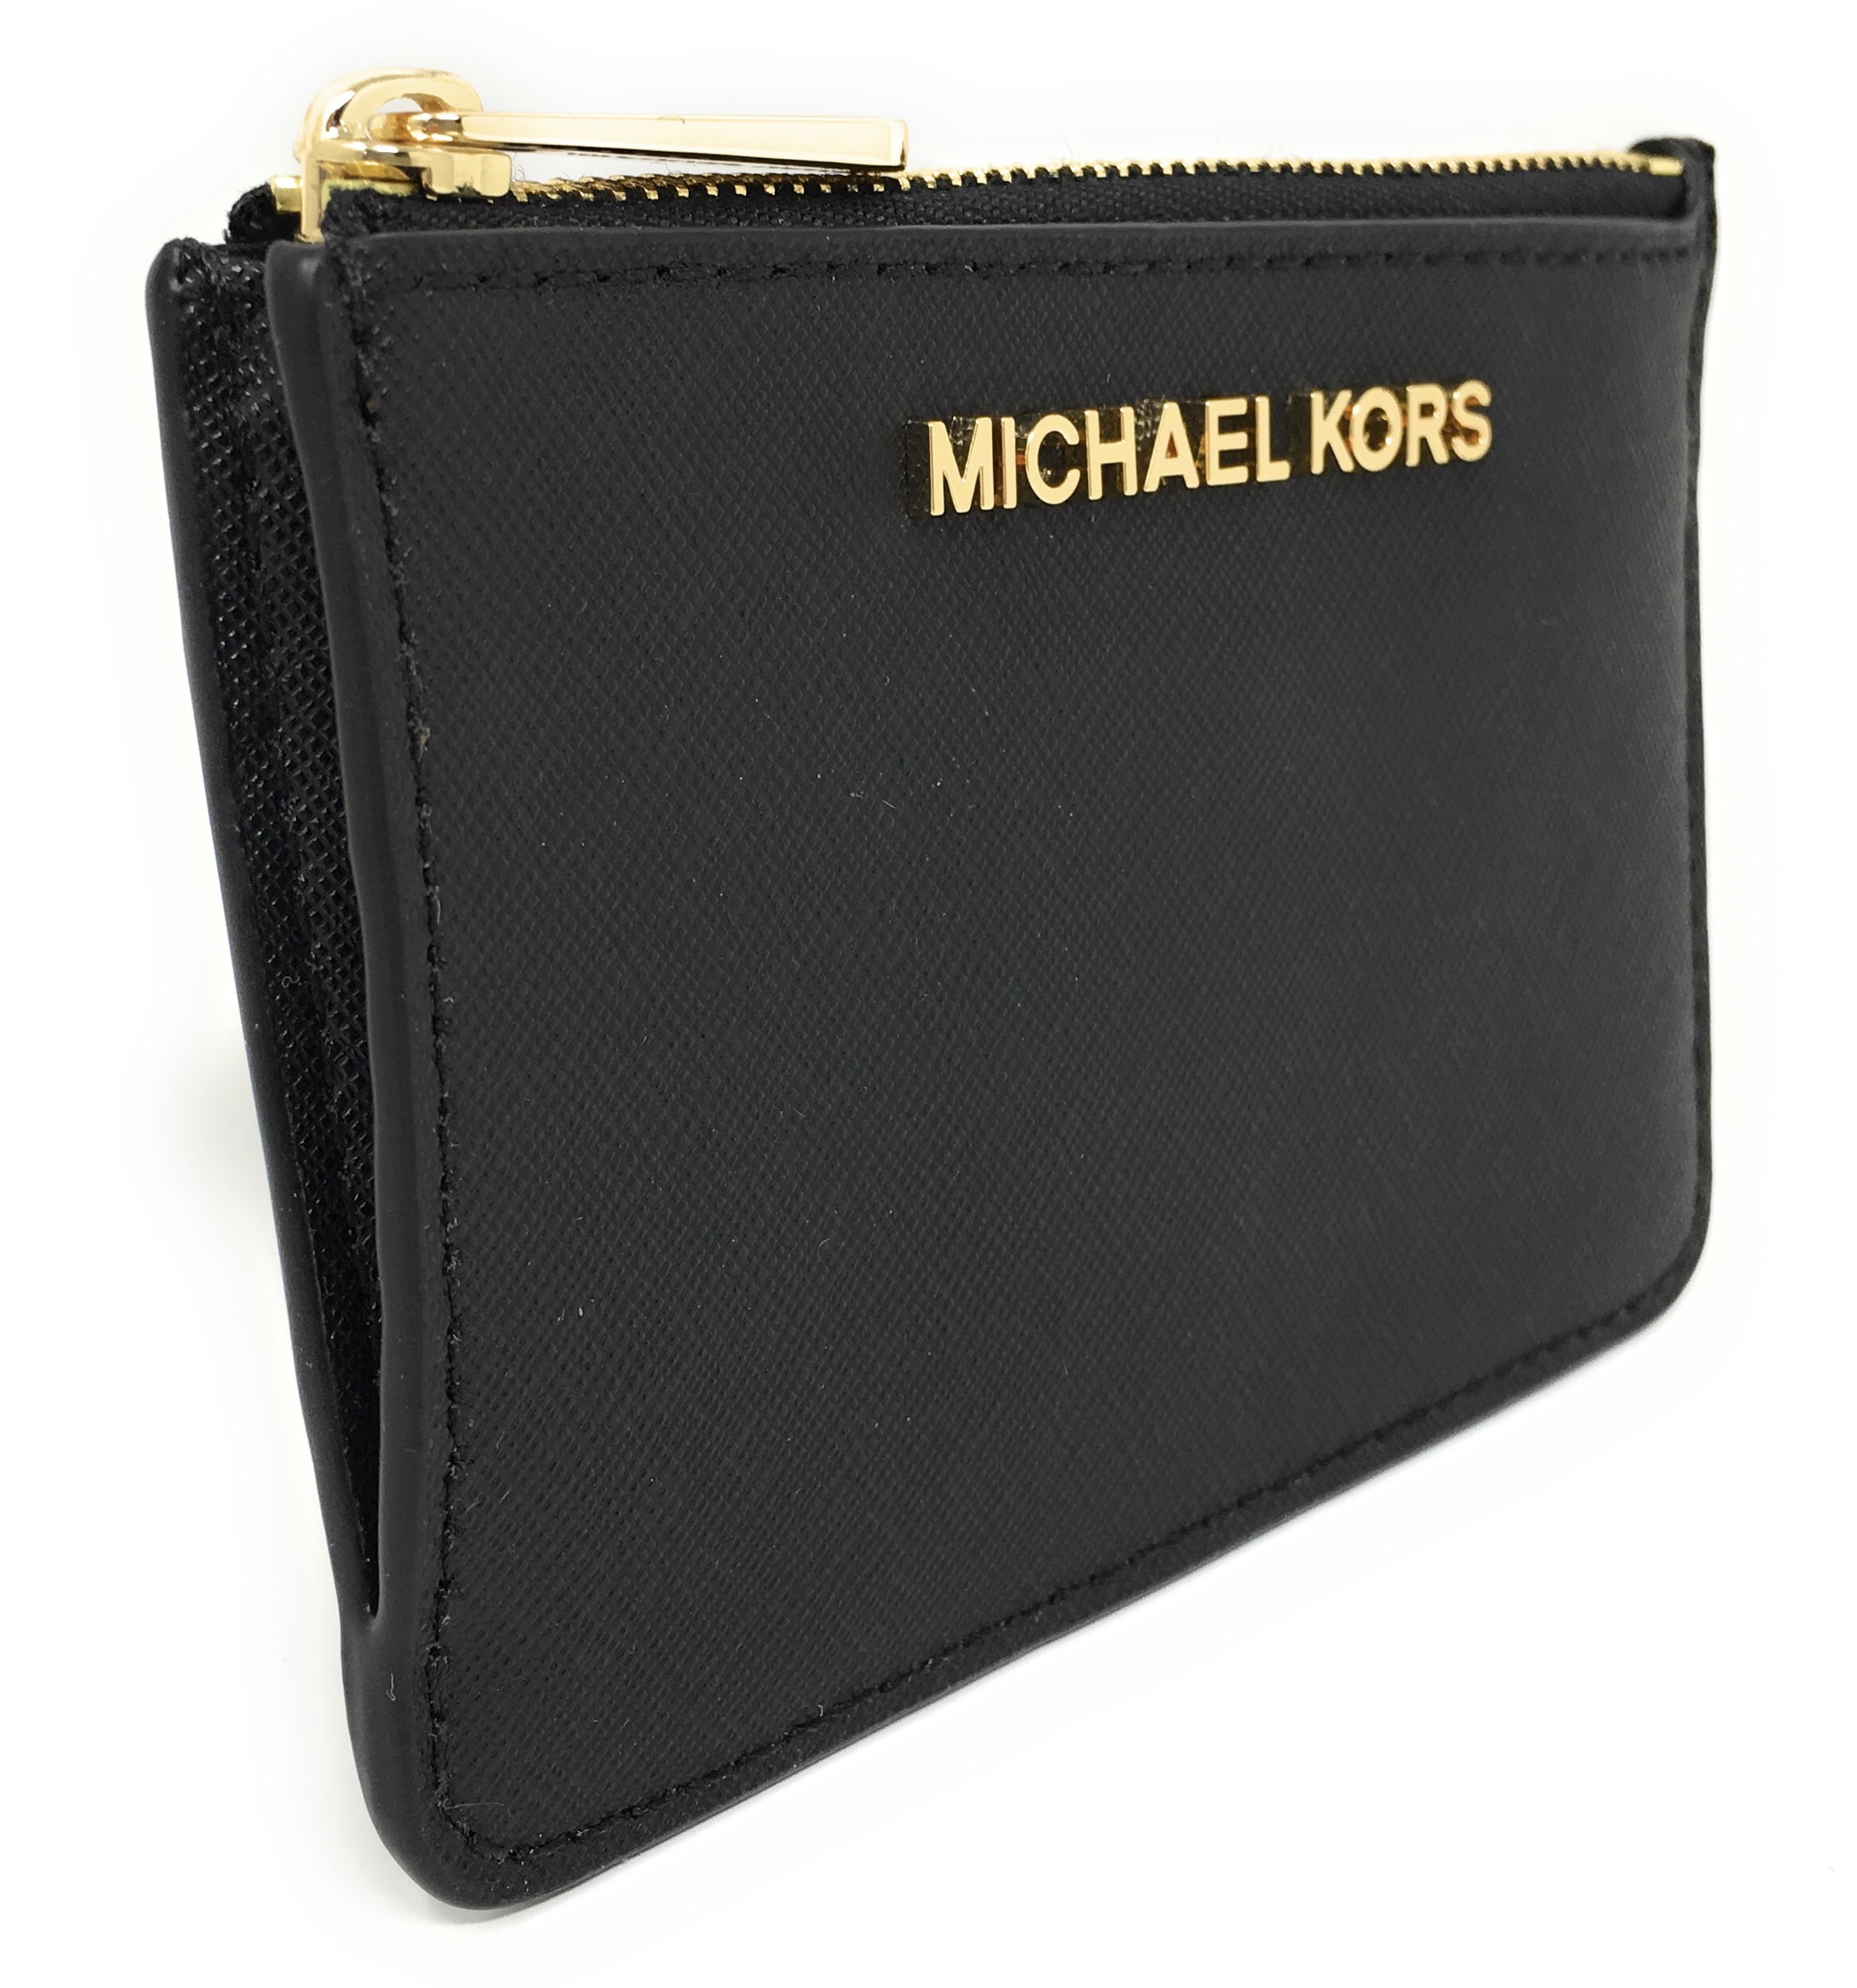 Michael Kors, Bags, Michael Kors Small Black Saffiano Leather Continental  Travel Zip Around Wallet